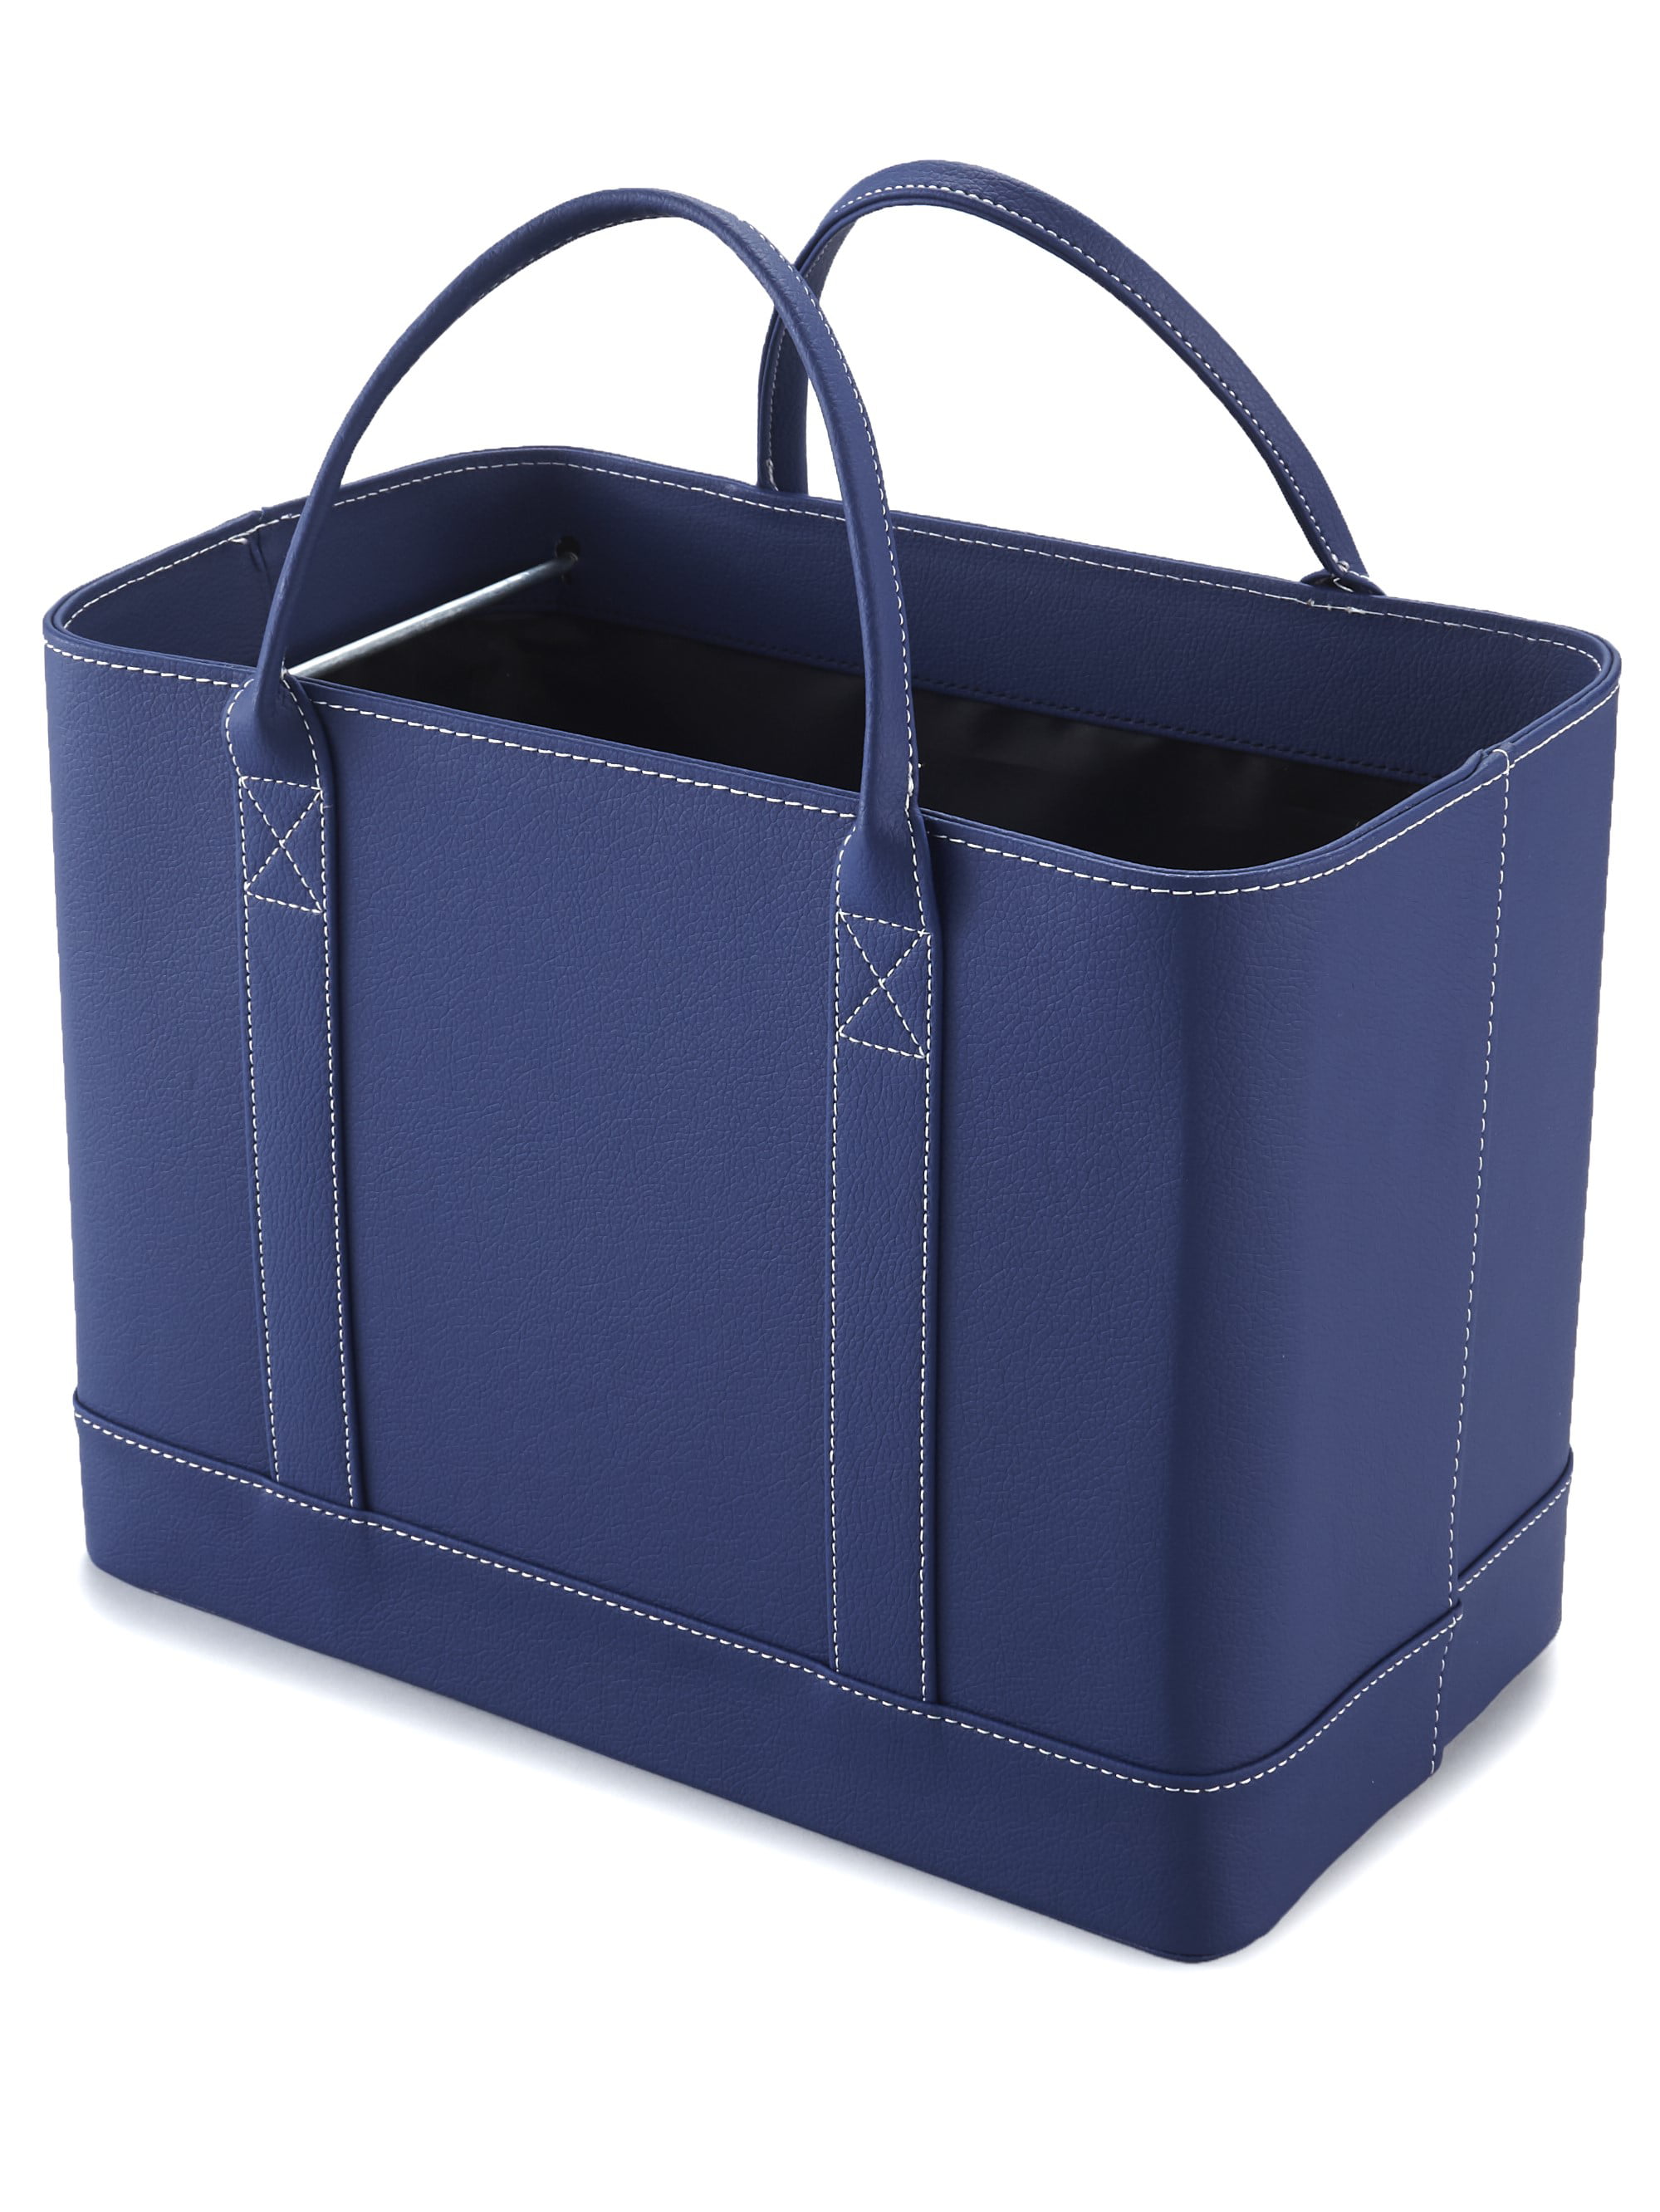 LevTex Portable File Tote | peacecommission.kdsg.gov.ng